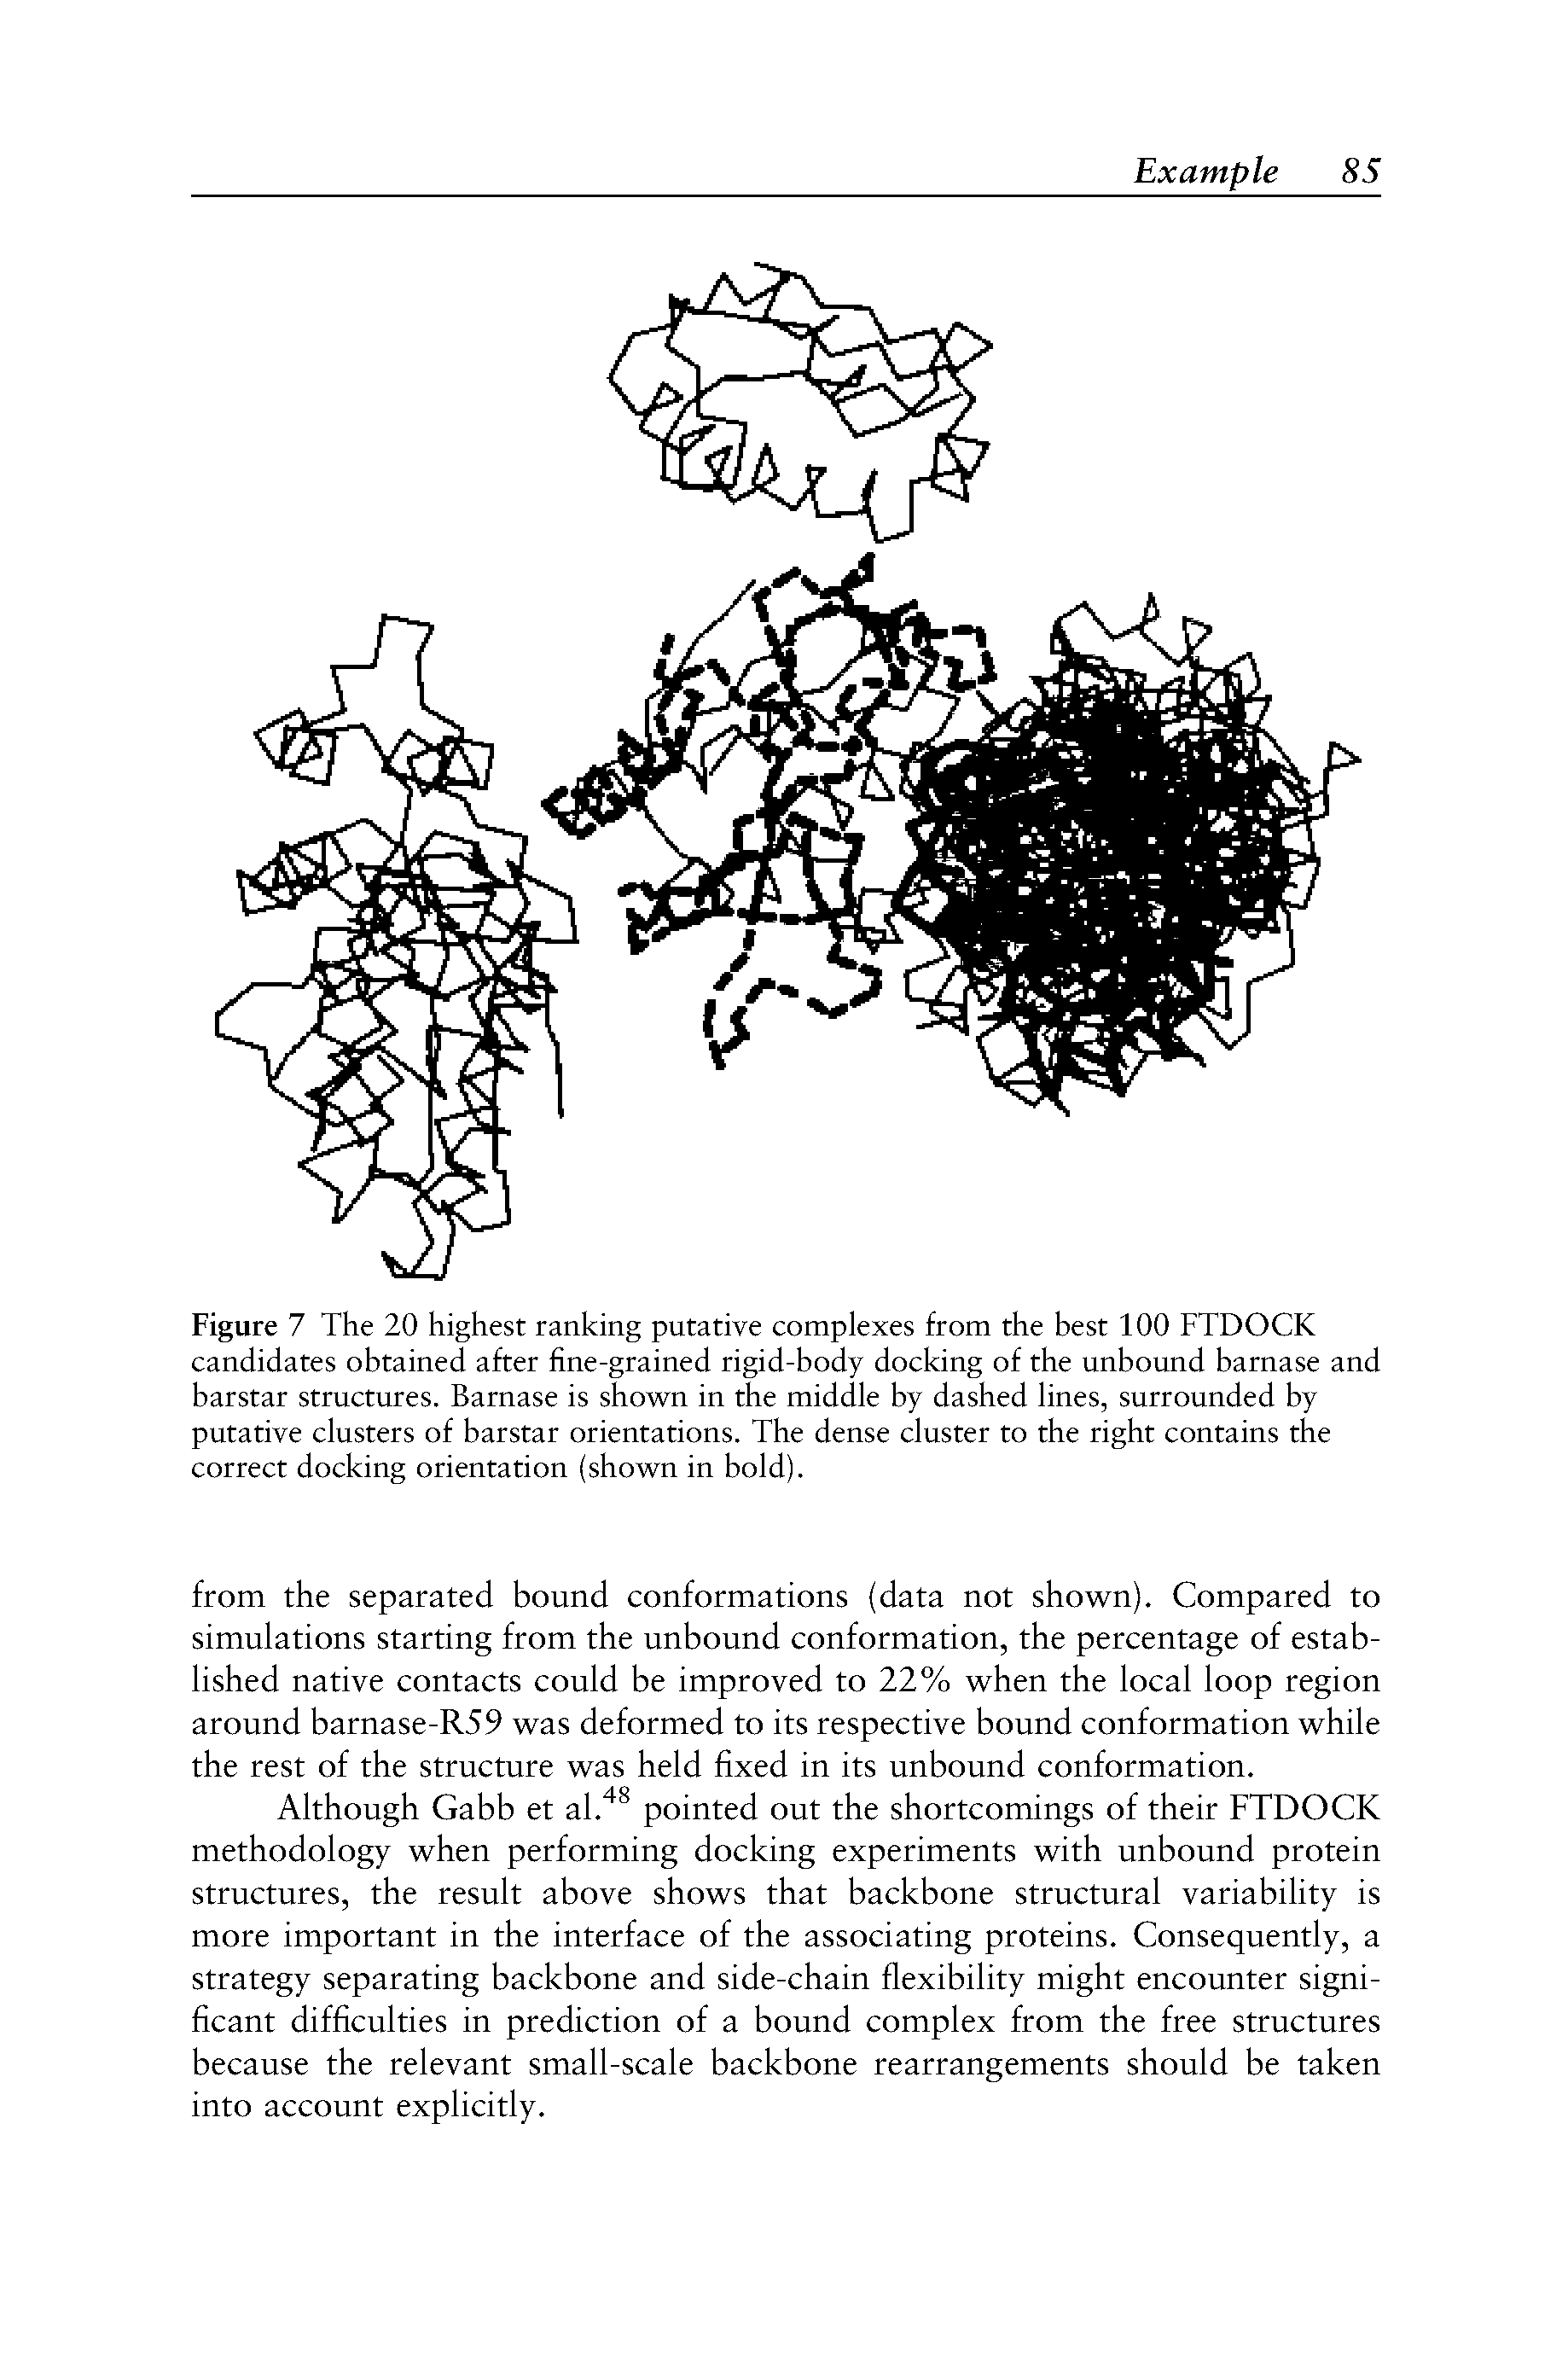 Figure 7 The 20 highest ranking putative complexes from the best 100 FTDOCK candidates obtained after fine-grained rigid-body docking of the unbound barnase and barstar structures. Barnase is shown in the middle by dashed lines, surrounded by putative clusters of barstar orientations. The dense cluster to the right contains the correct docking orientation (shown in bold).